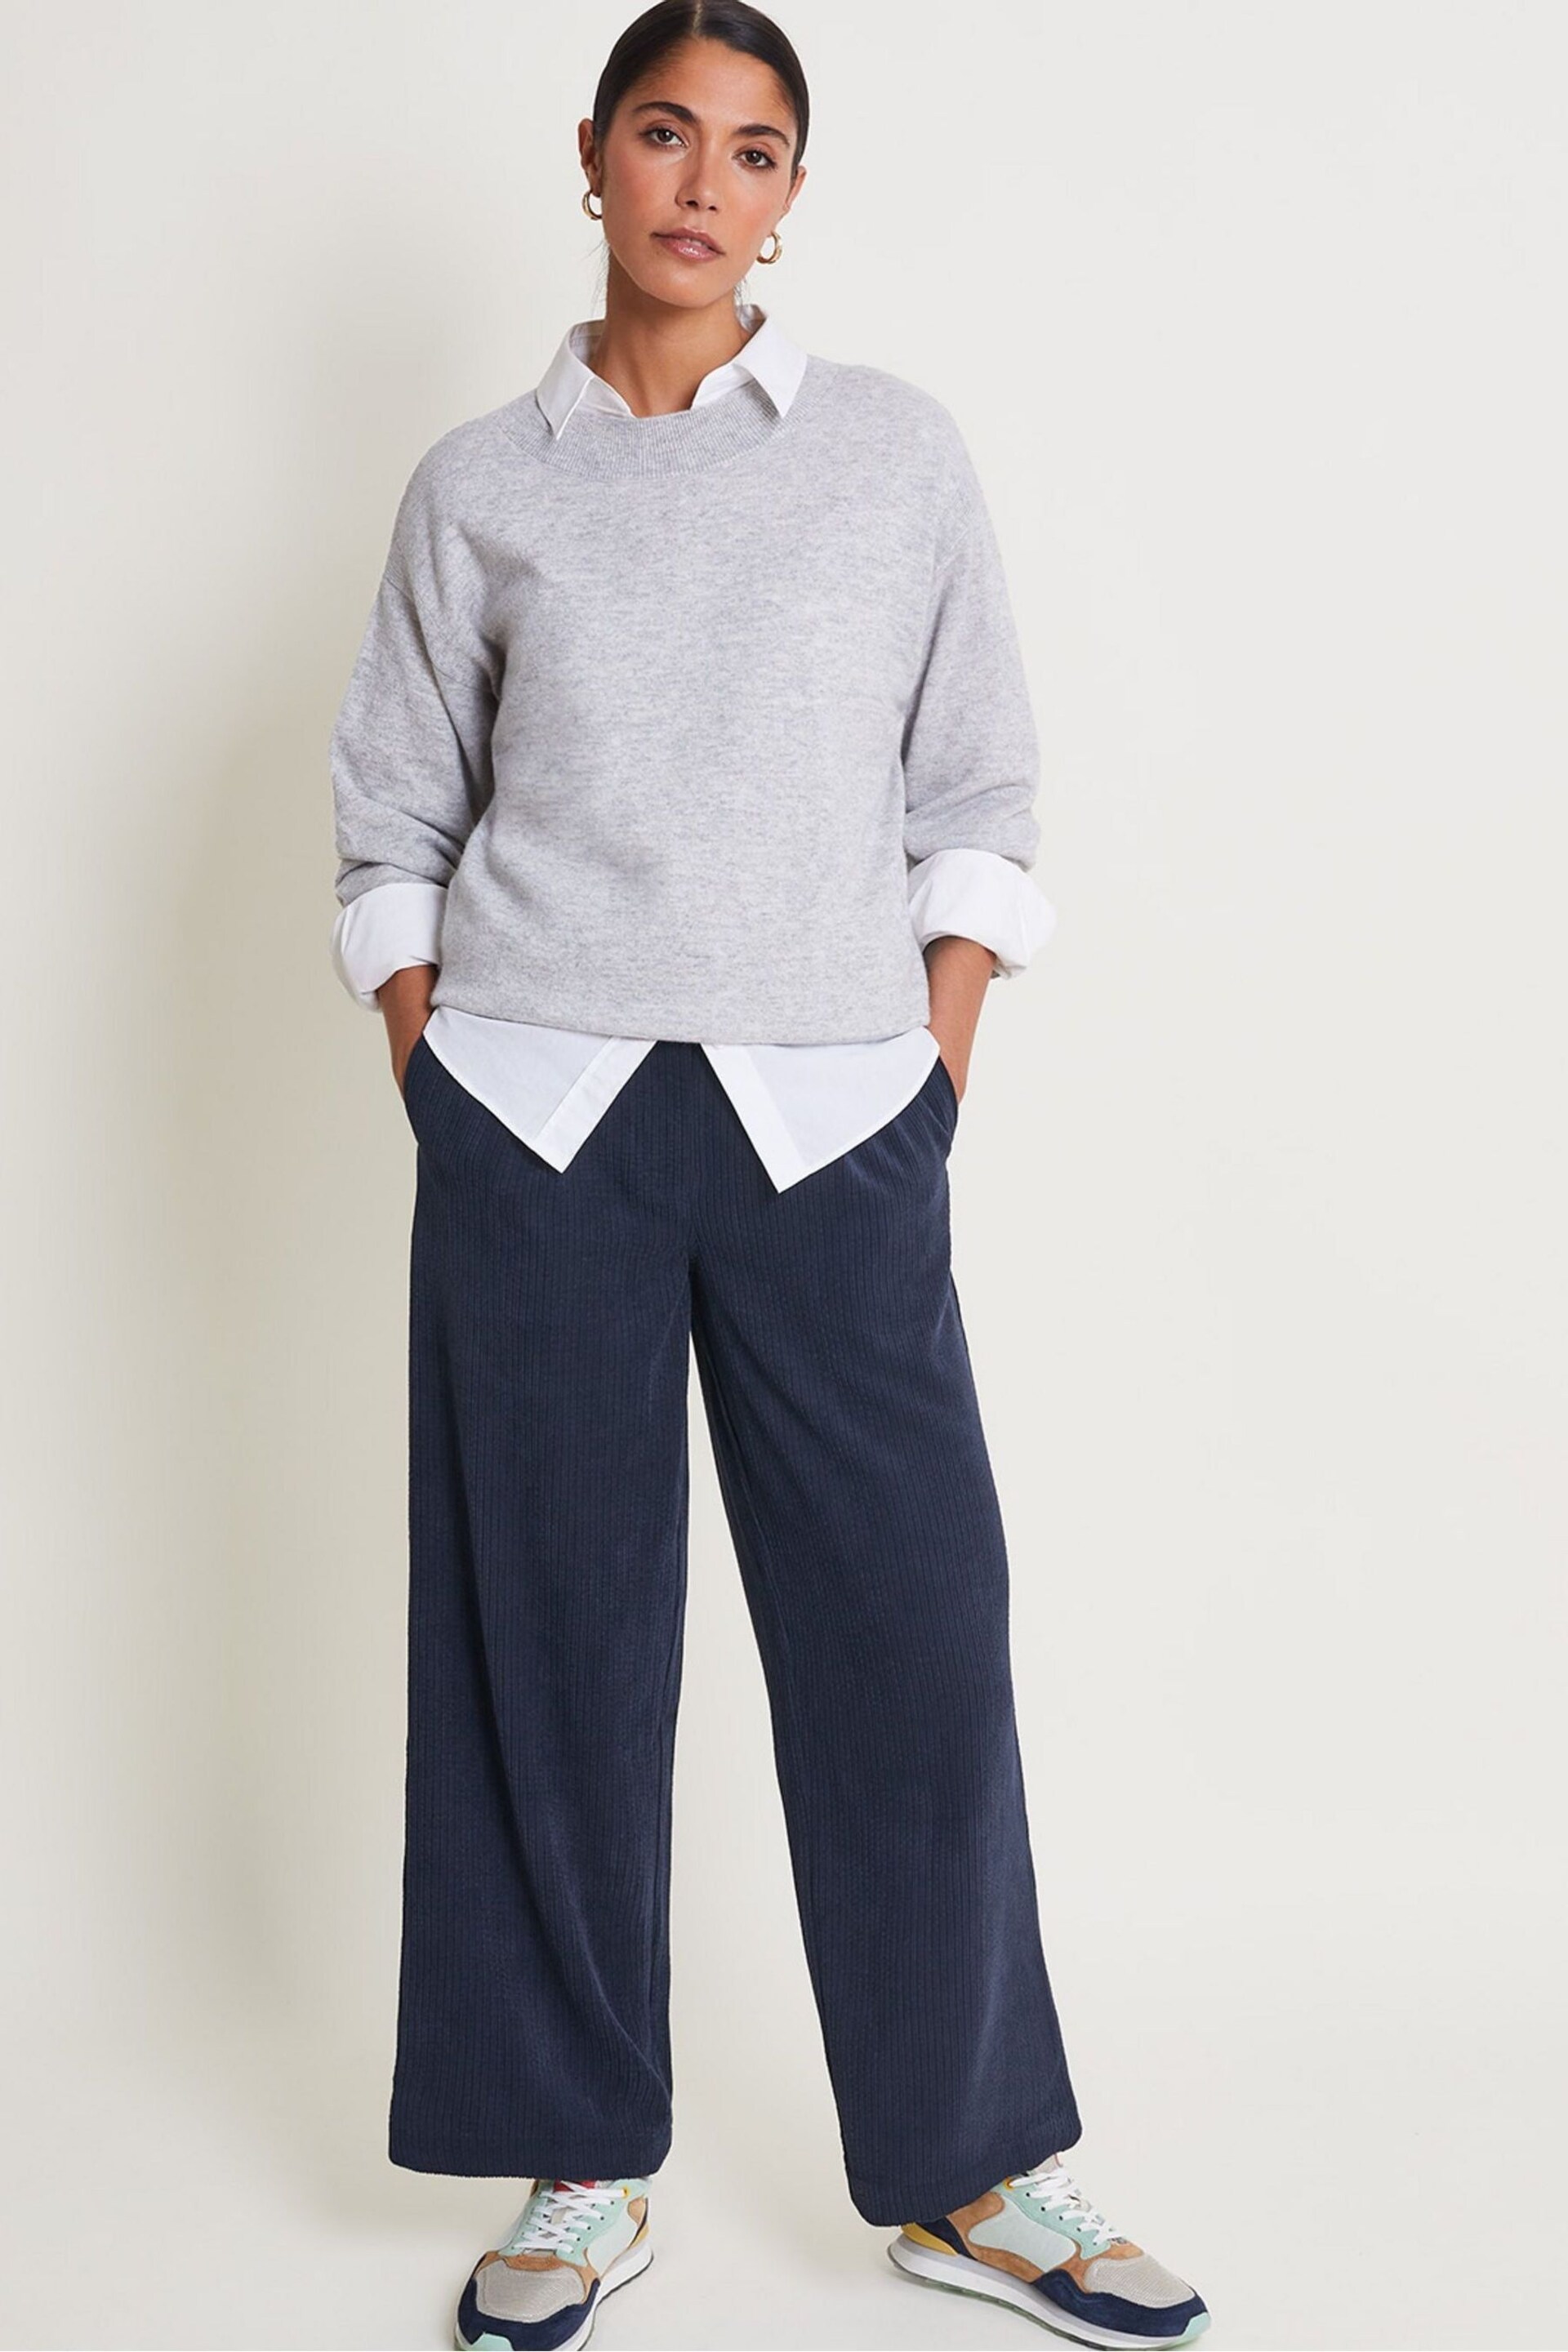 Monsoon Blue Serena Wide Leg Cord Trousers - Image 1 of 5